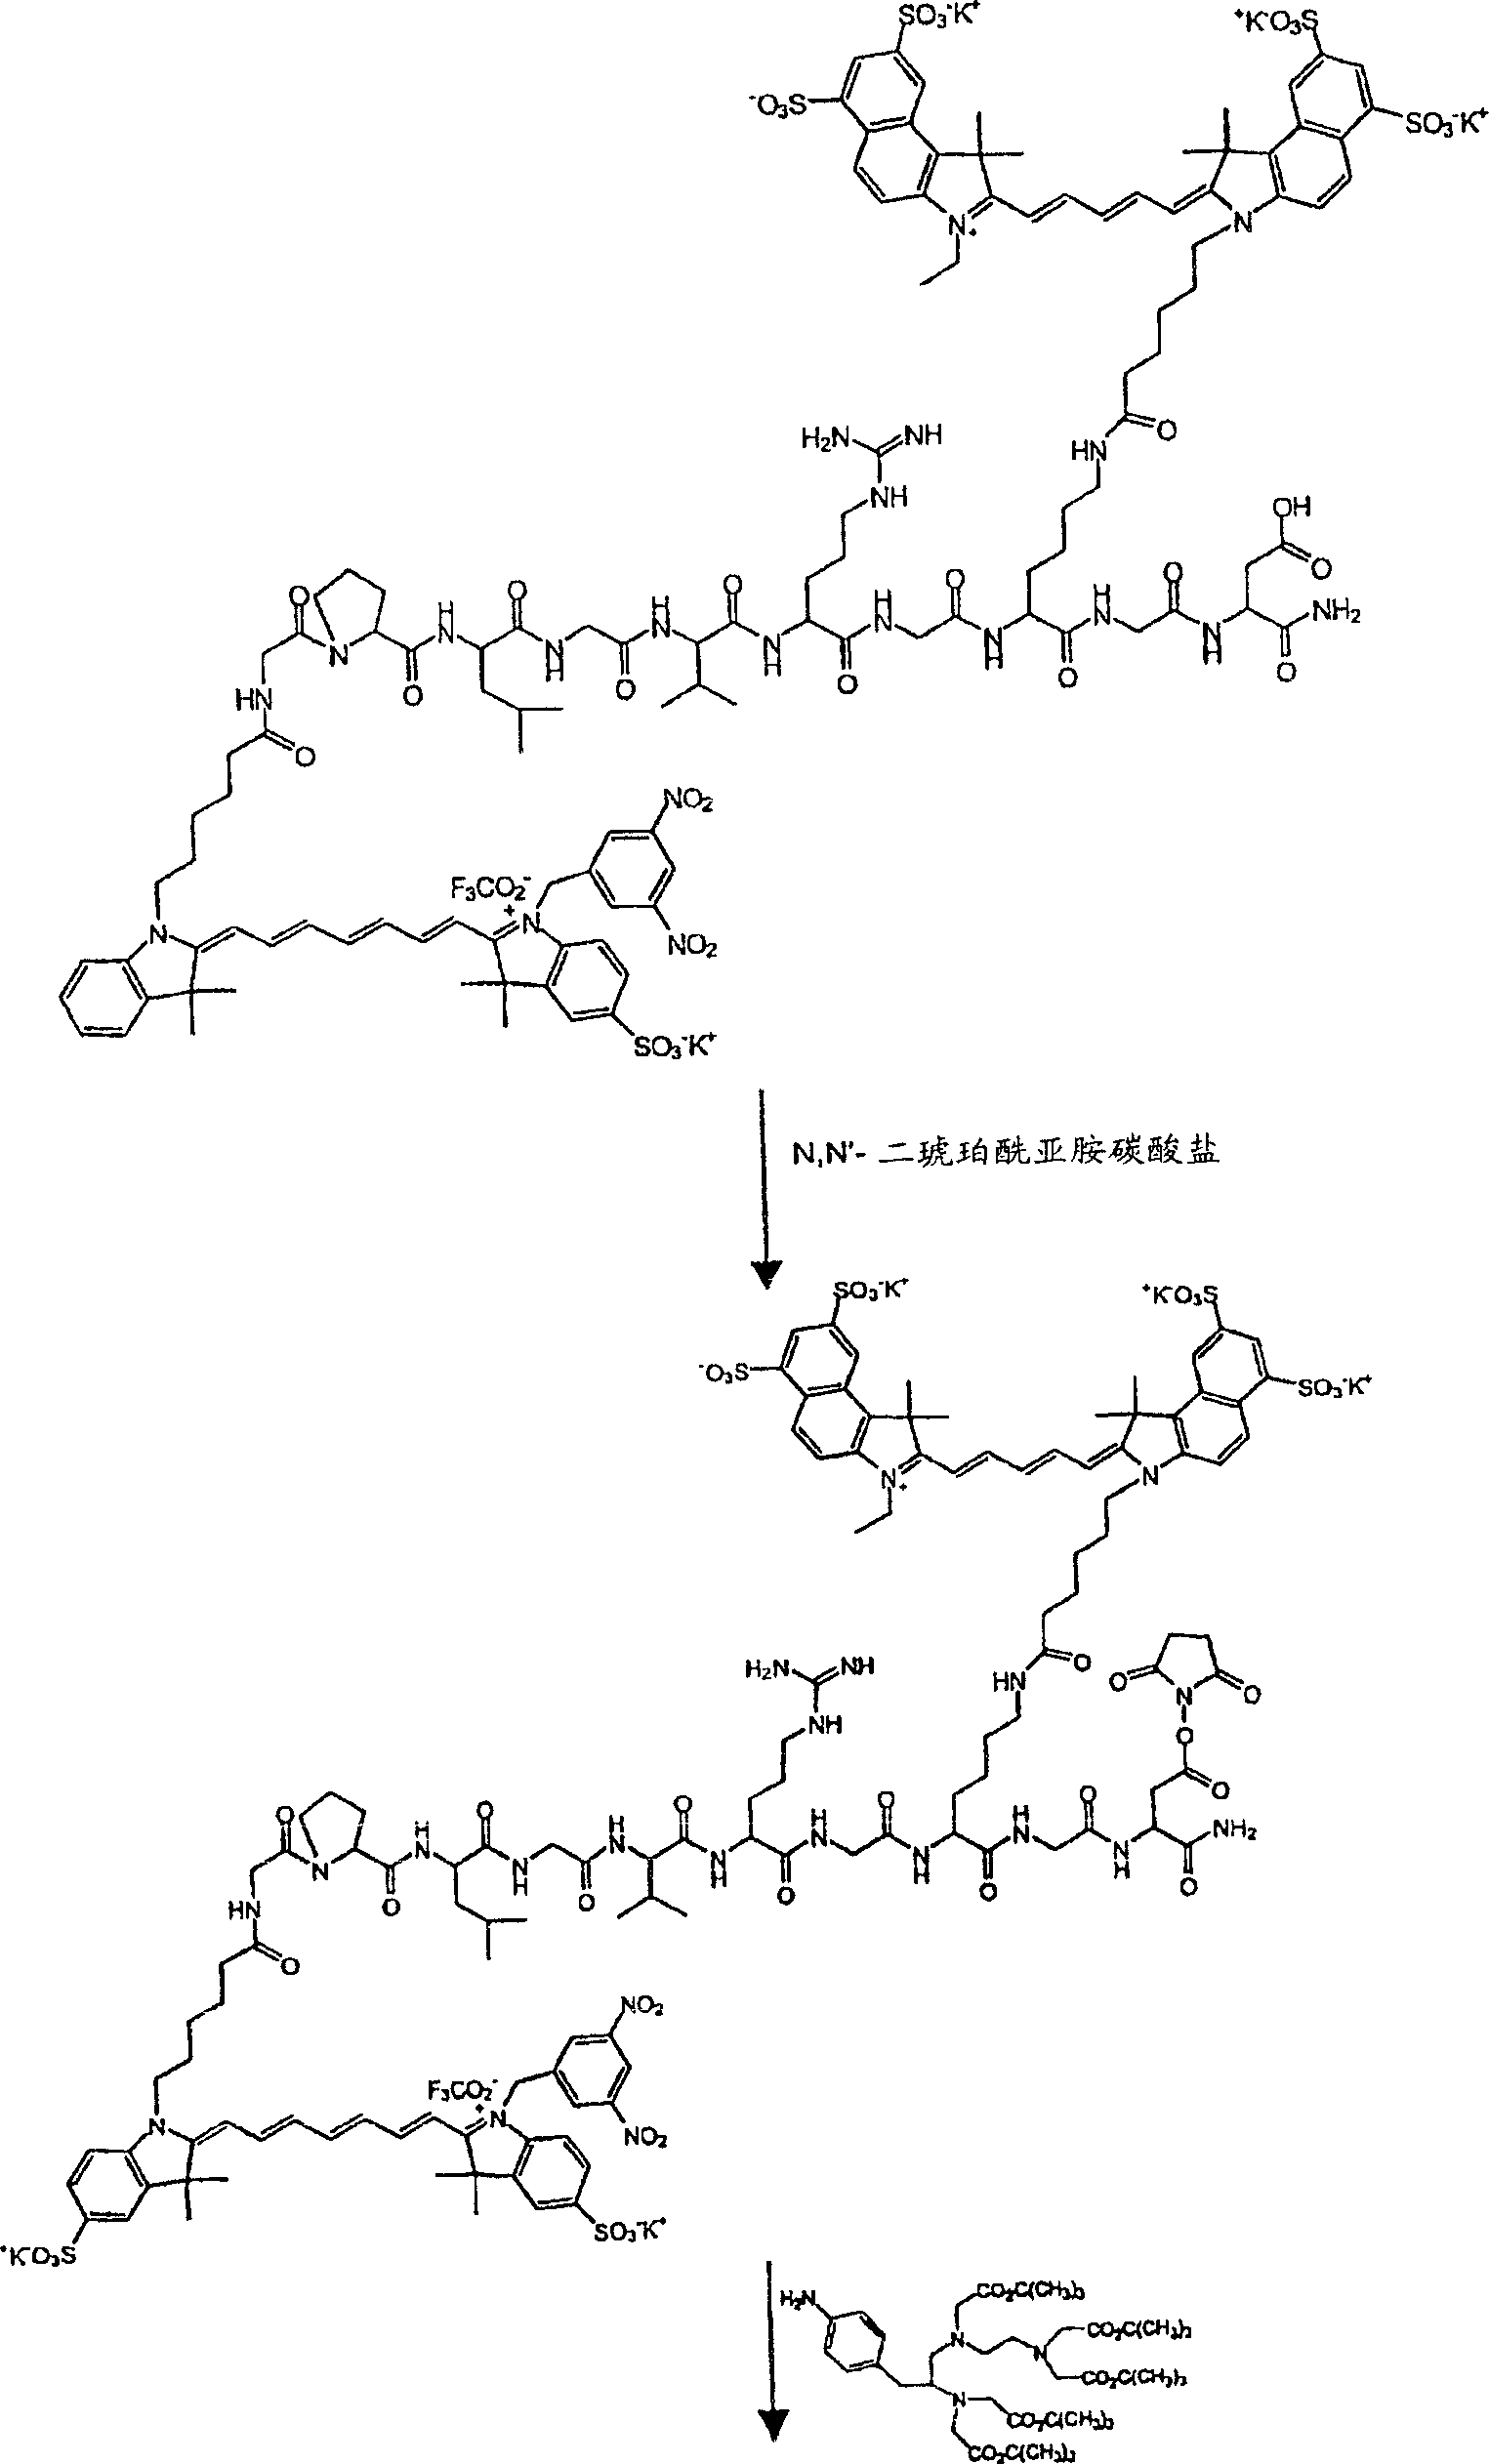 Bifunctional contrast agent comprising a fluorescent dye and an MRI contrast agent